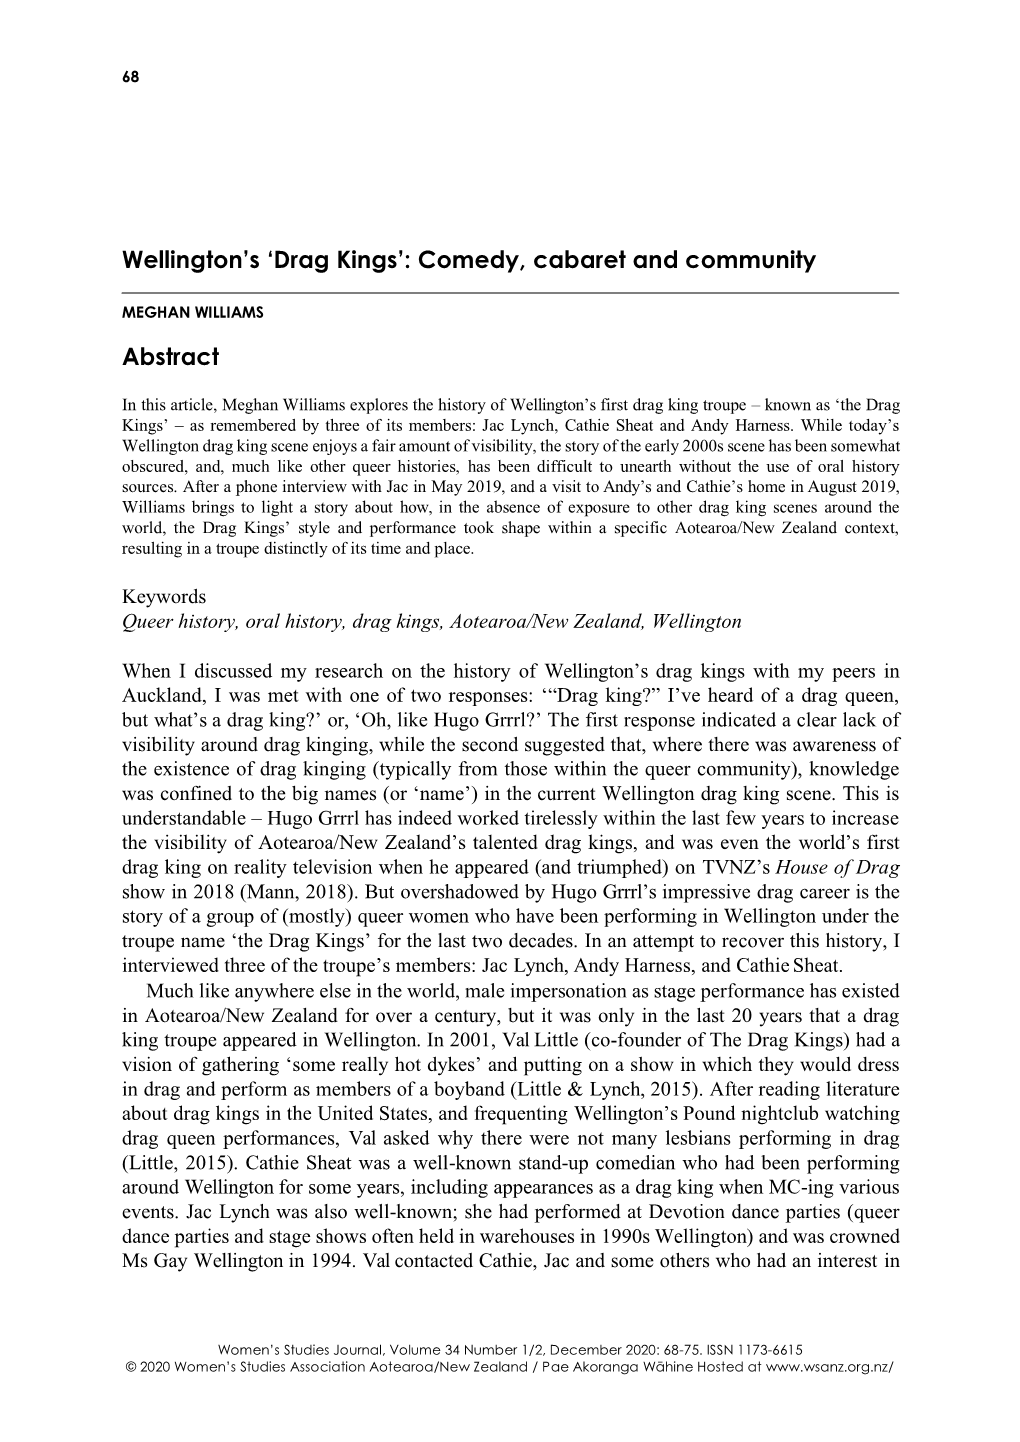 Wellington's 'Drag Kings': Comedy, Cabaret and Community Abstract